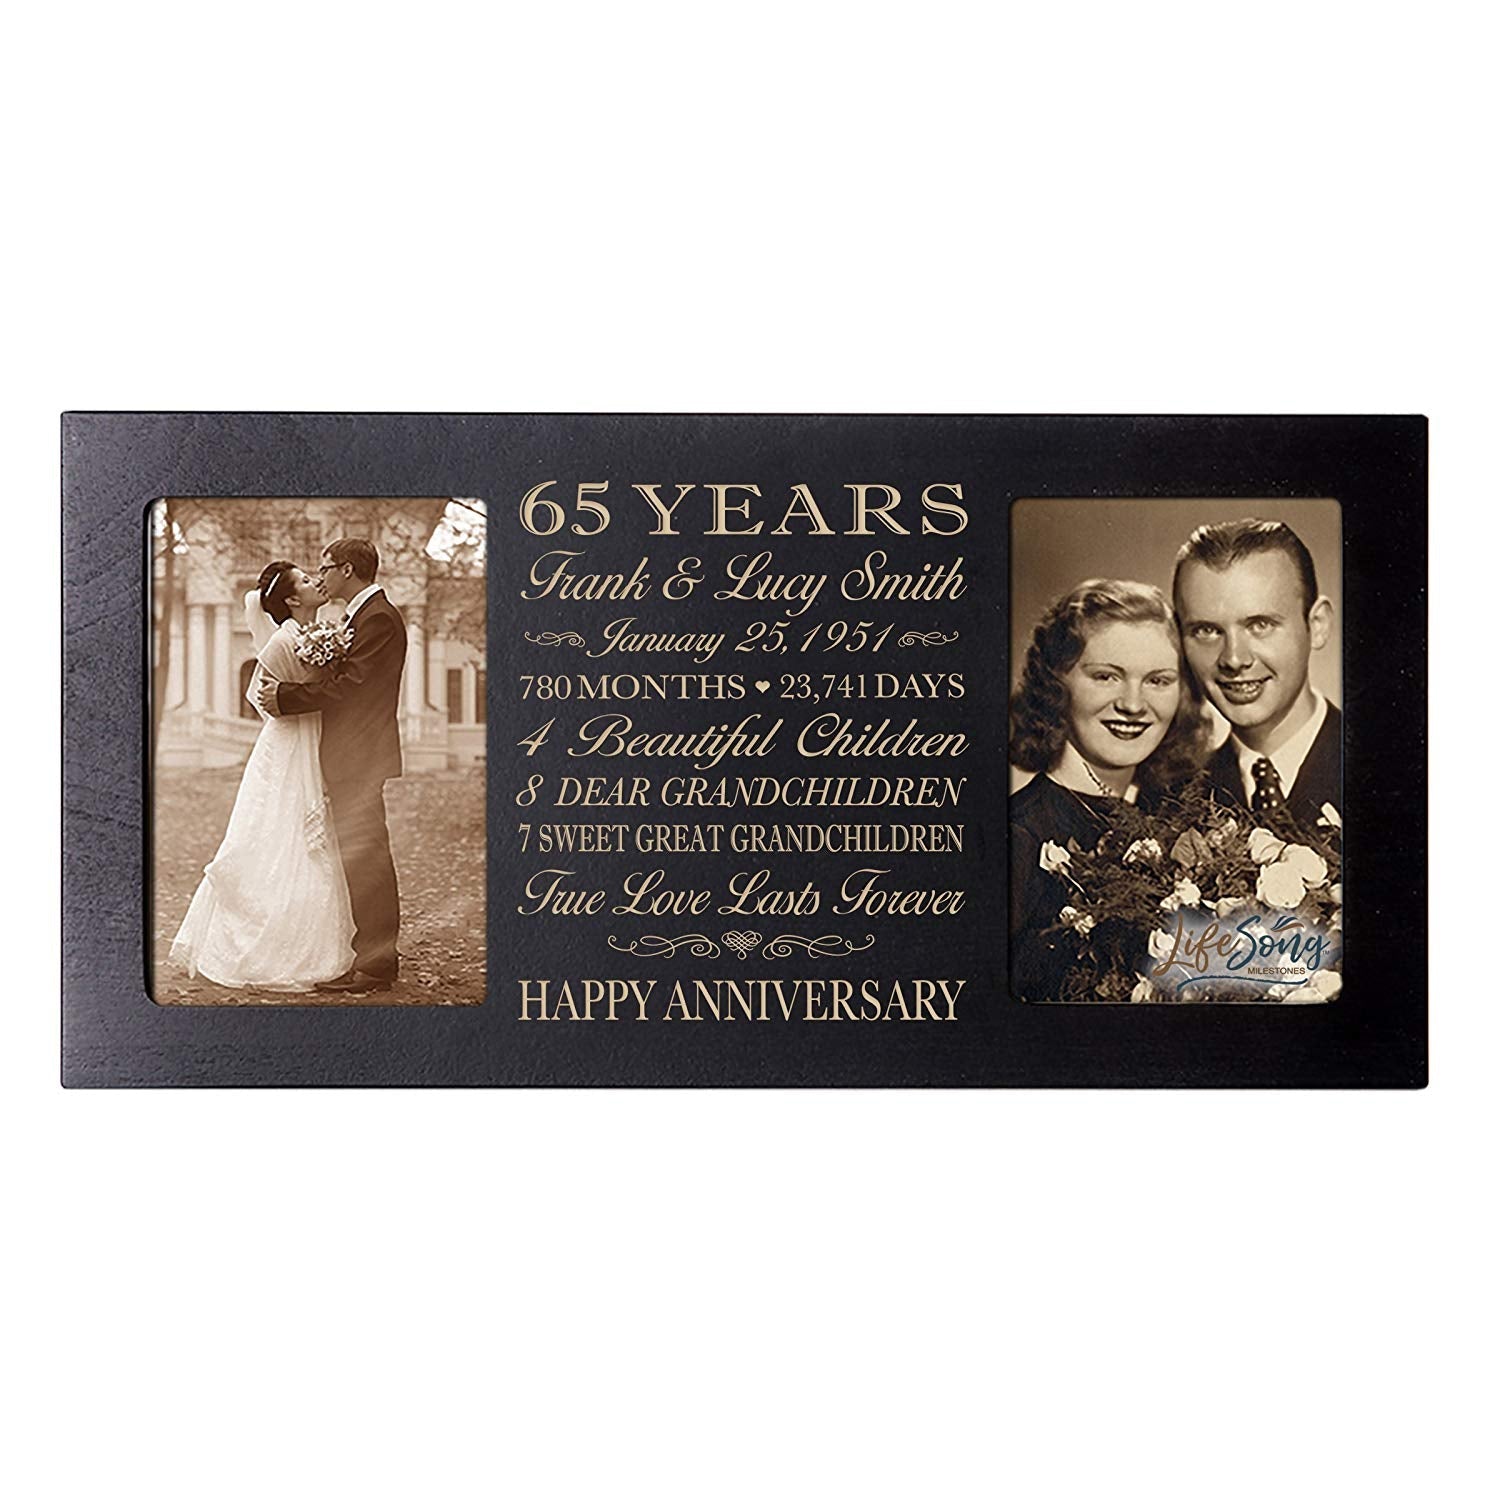 Lifesong Milestones Personalized Picture Frame for Couples 65th Wedding Anniversary Decorations